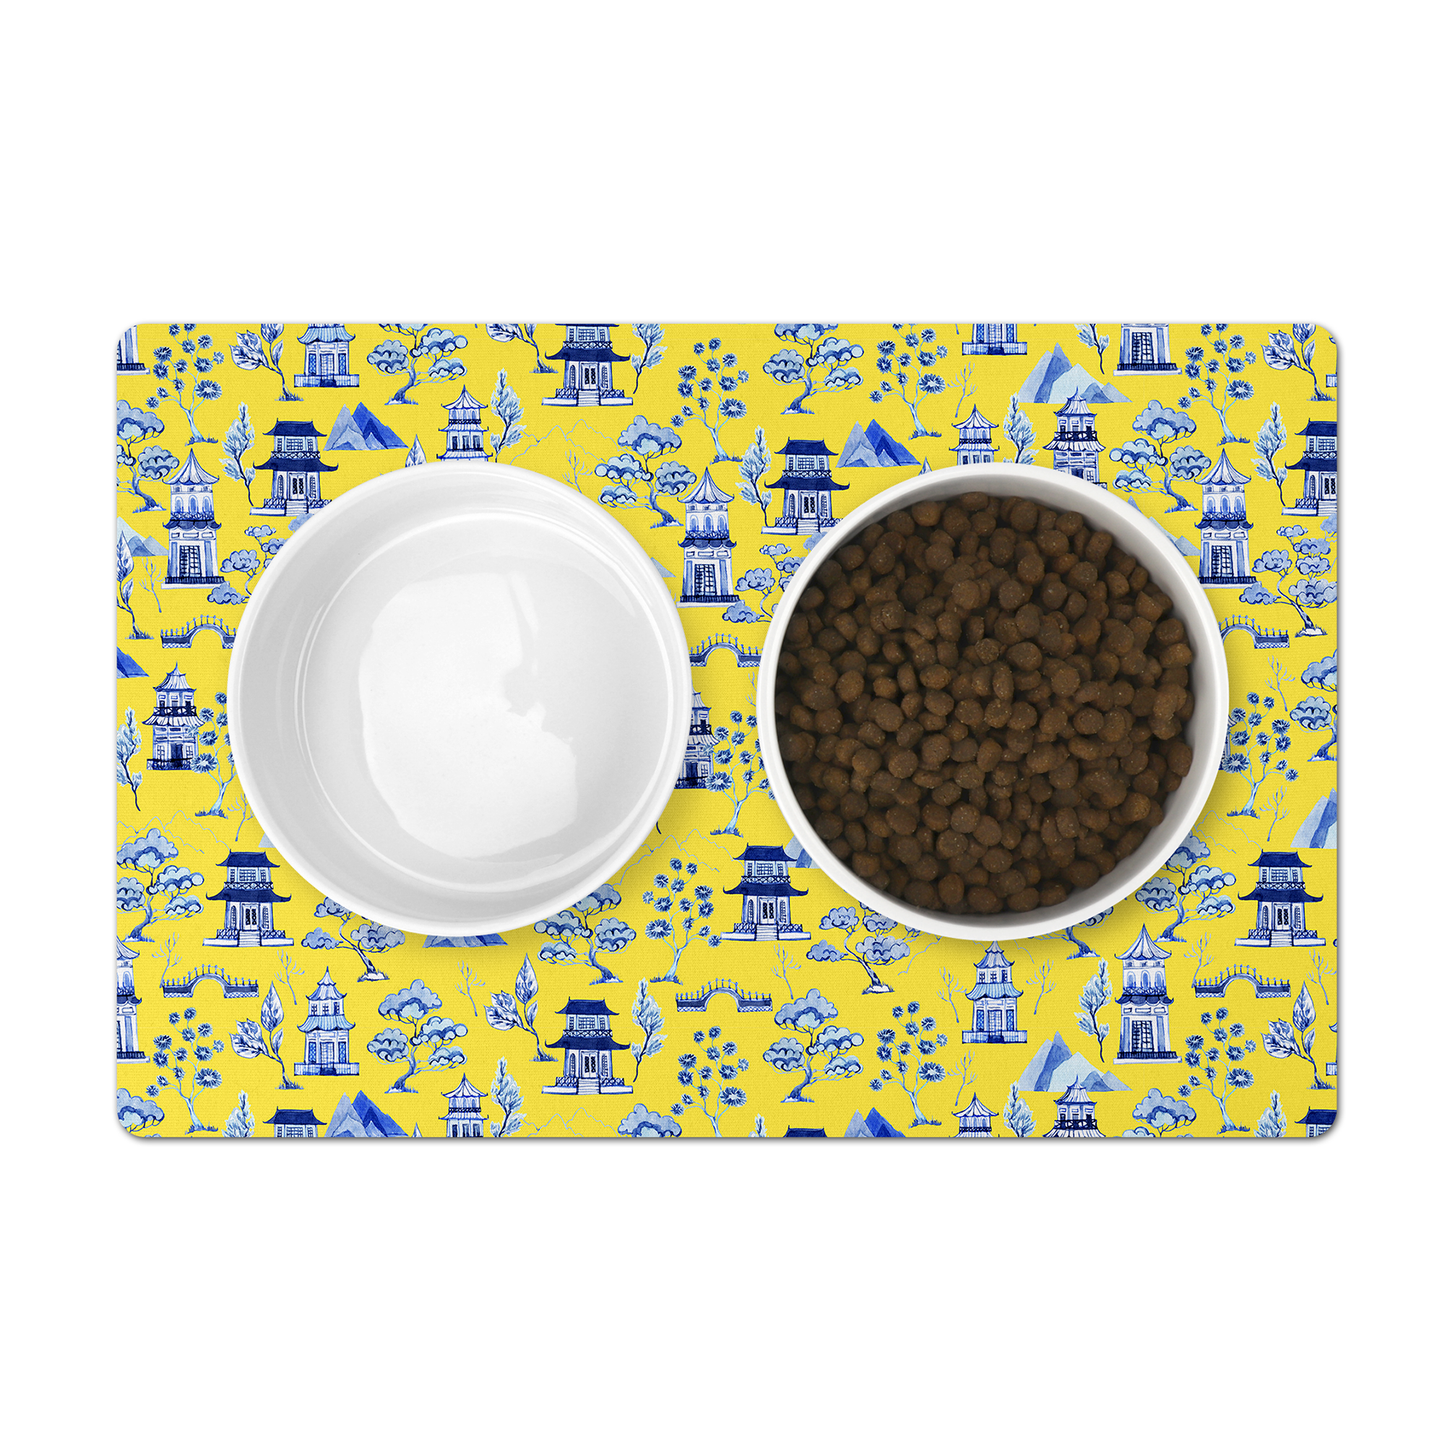 Pet Placemat, Chinoiserie, Toile, Yellow, Blue and White, 12" x 18"